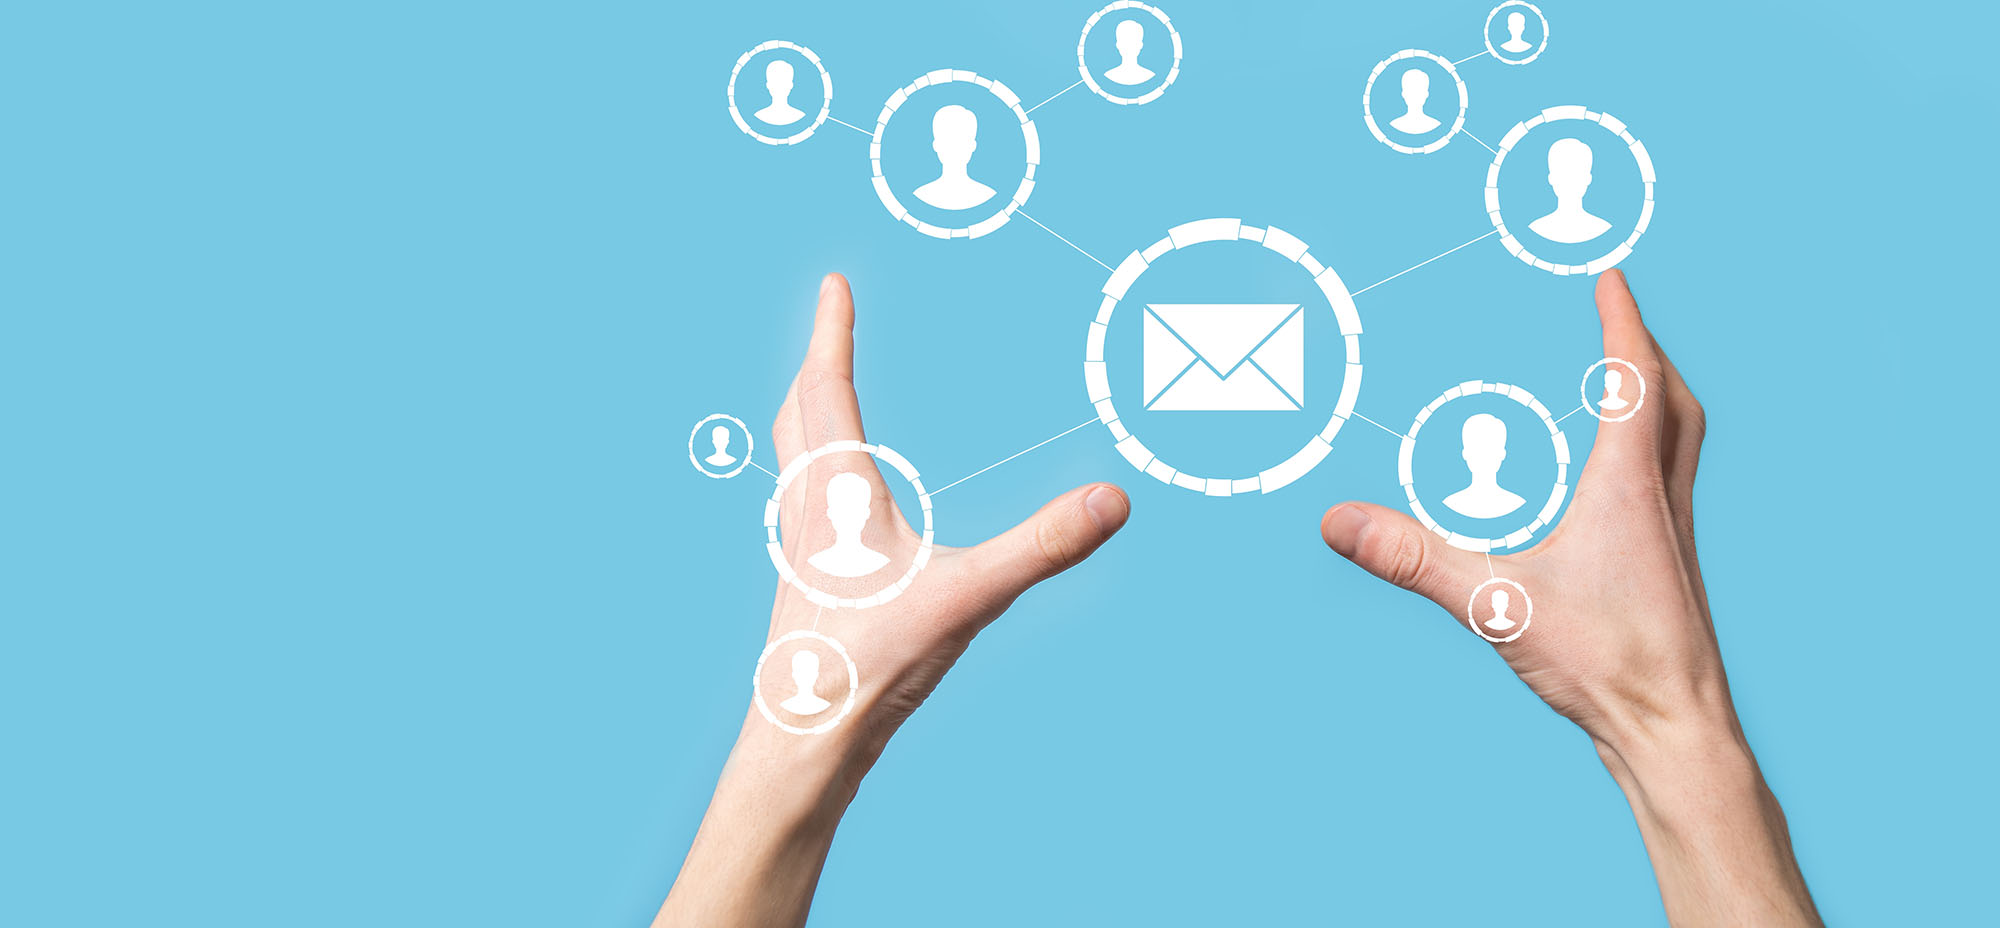 Understanding Your Audience: The First Step in Effective Email Marketing